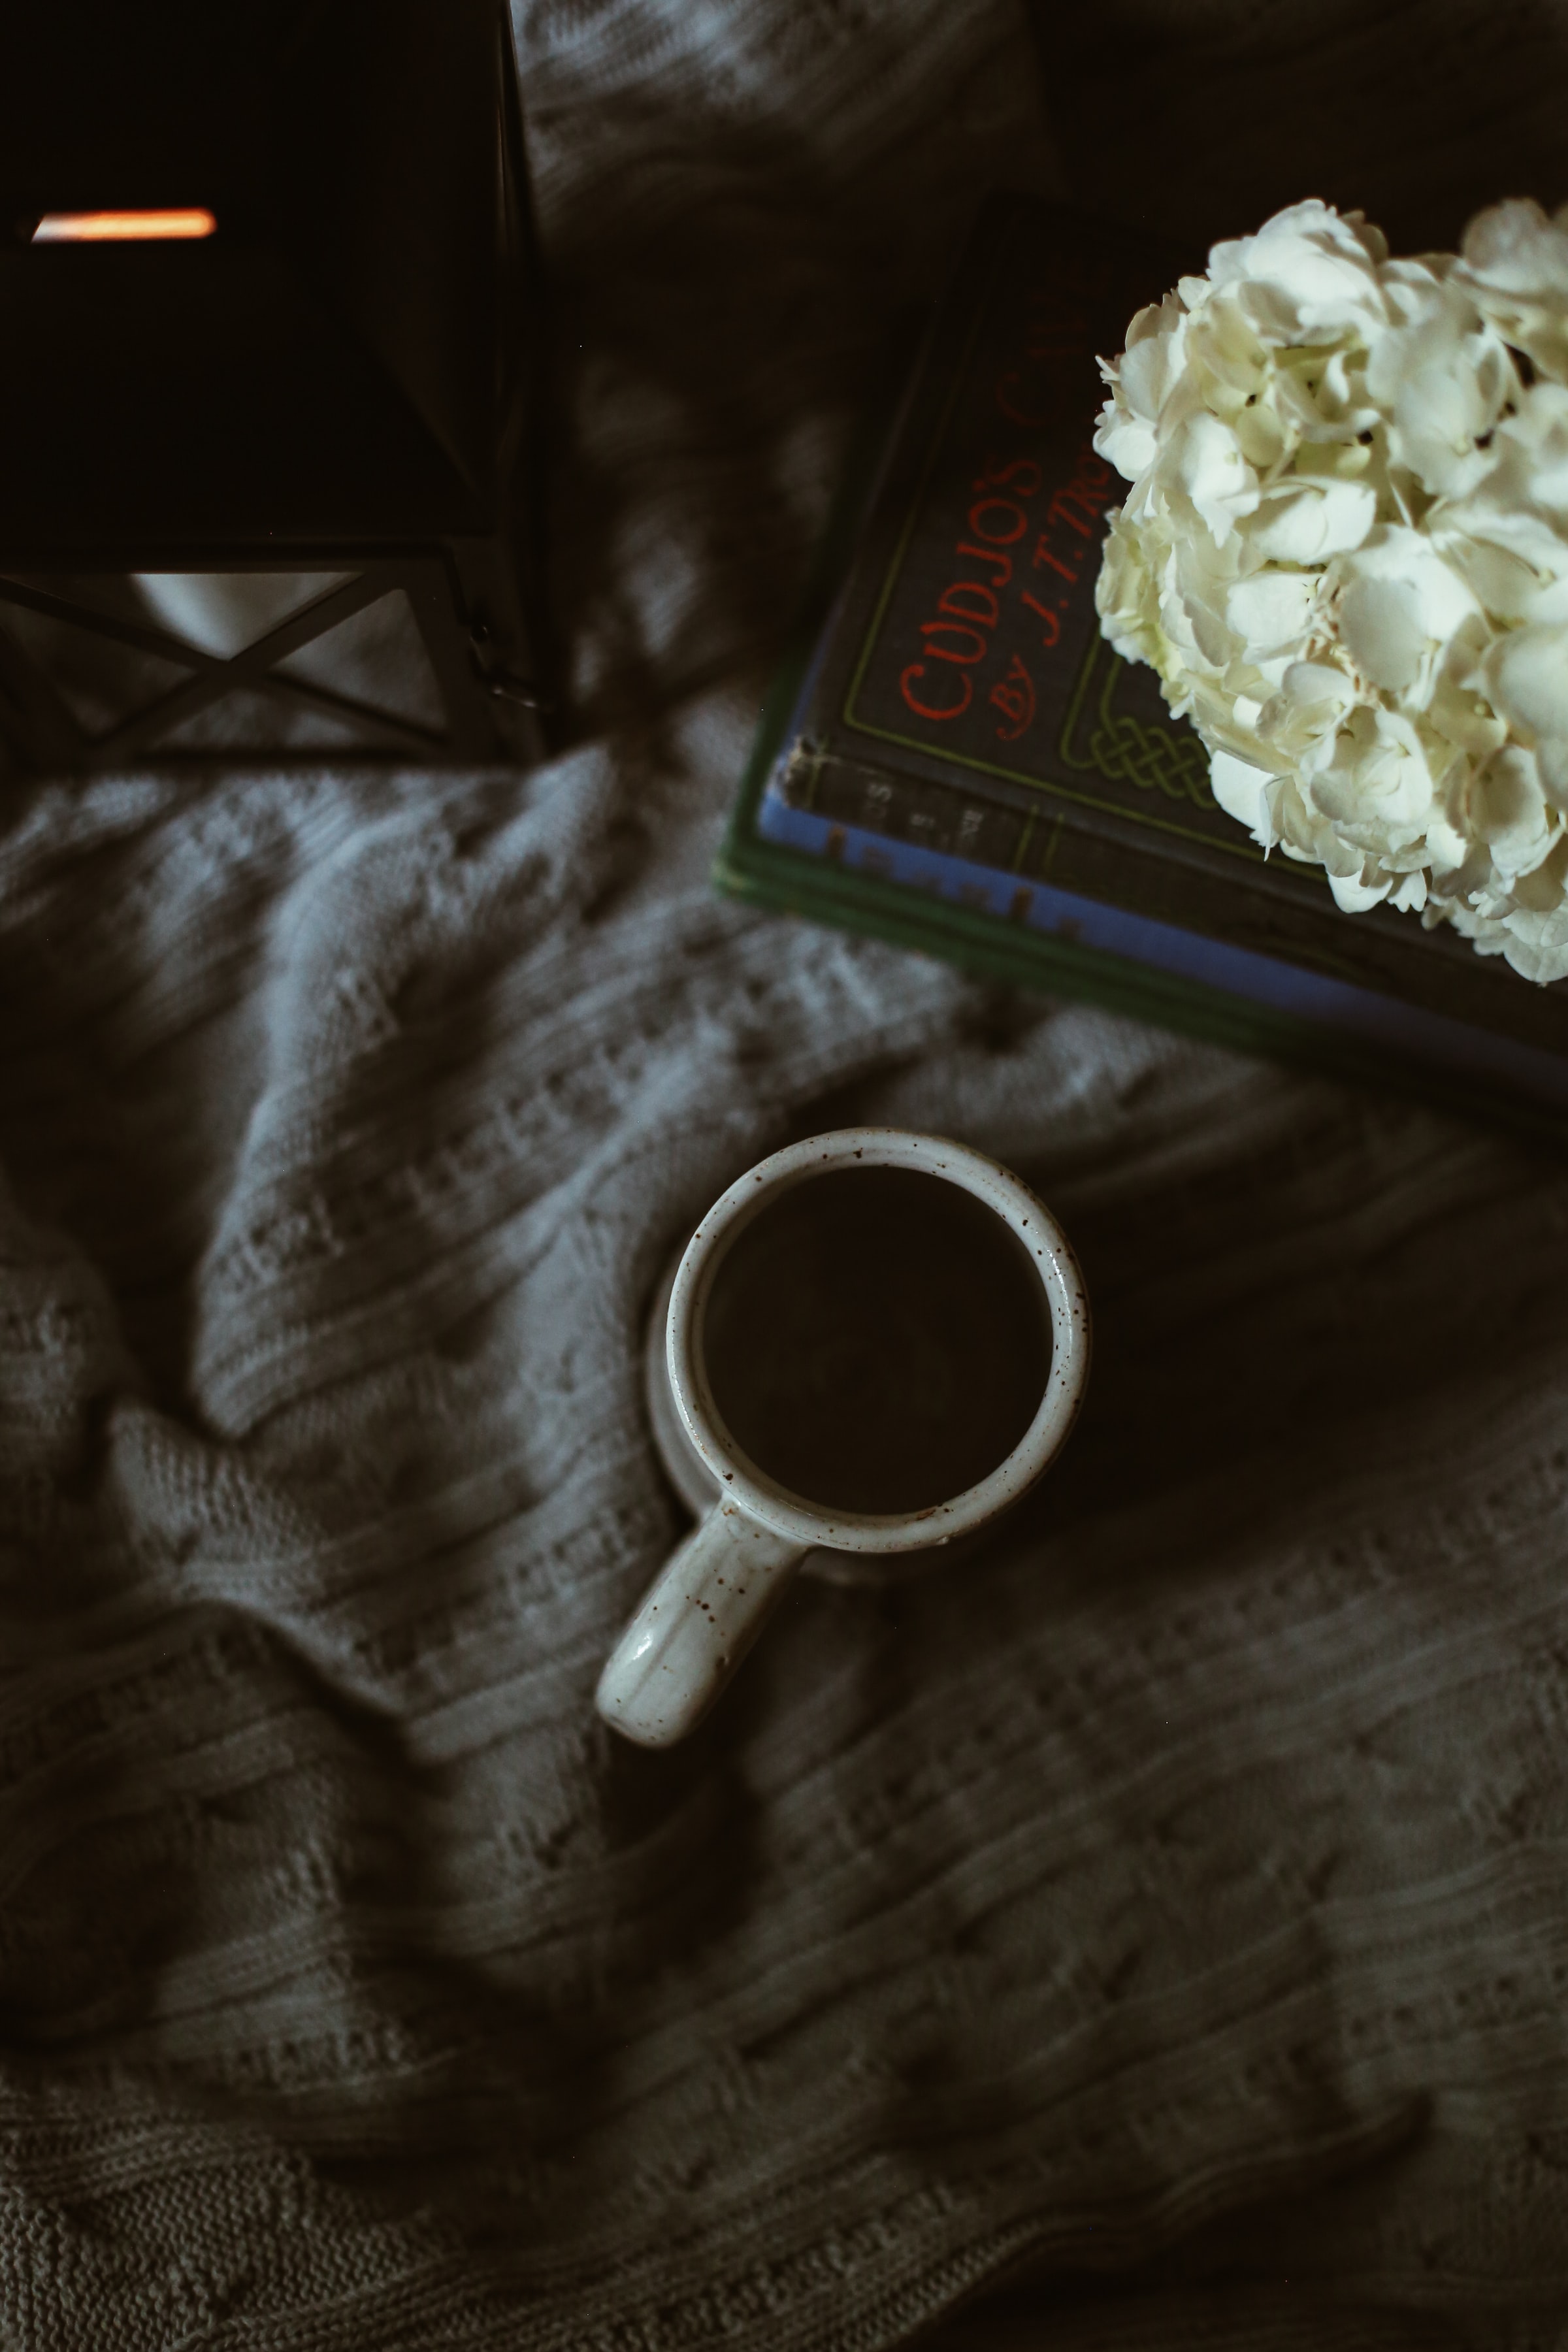 flowers, coffee, miscellanea, miscellaneous, cup, cloth, book HD for desktop 1080p